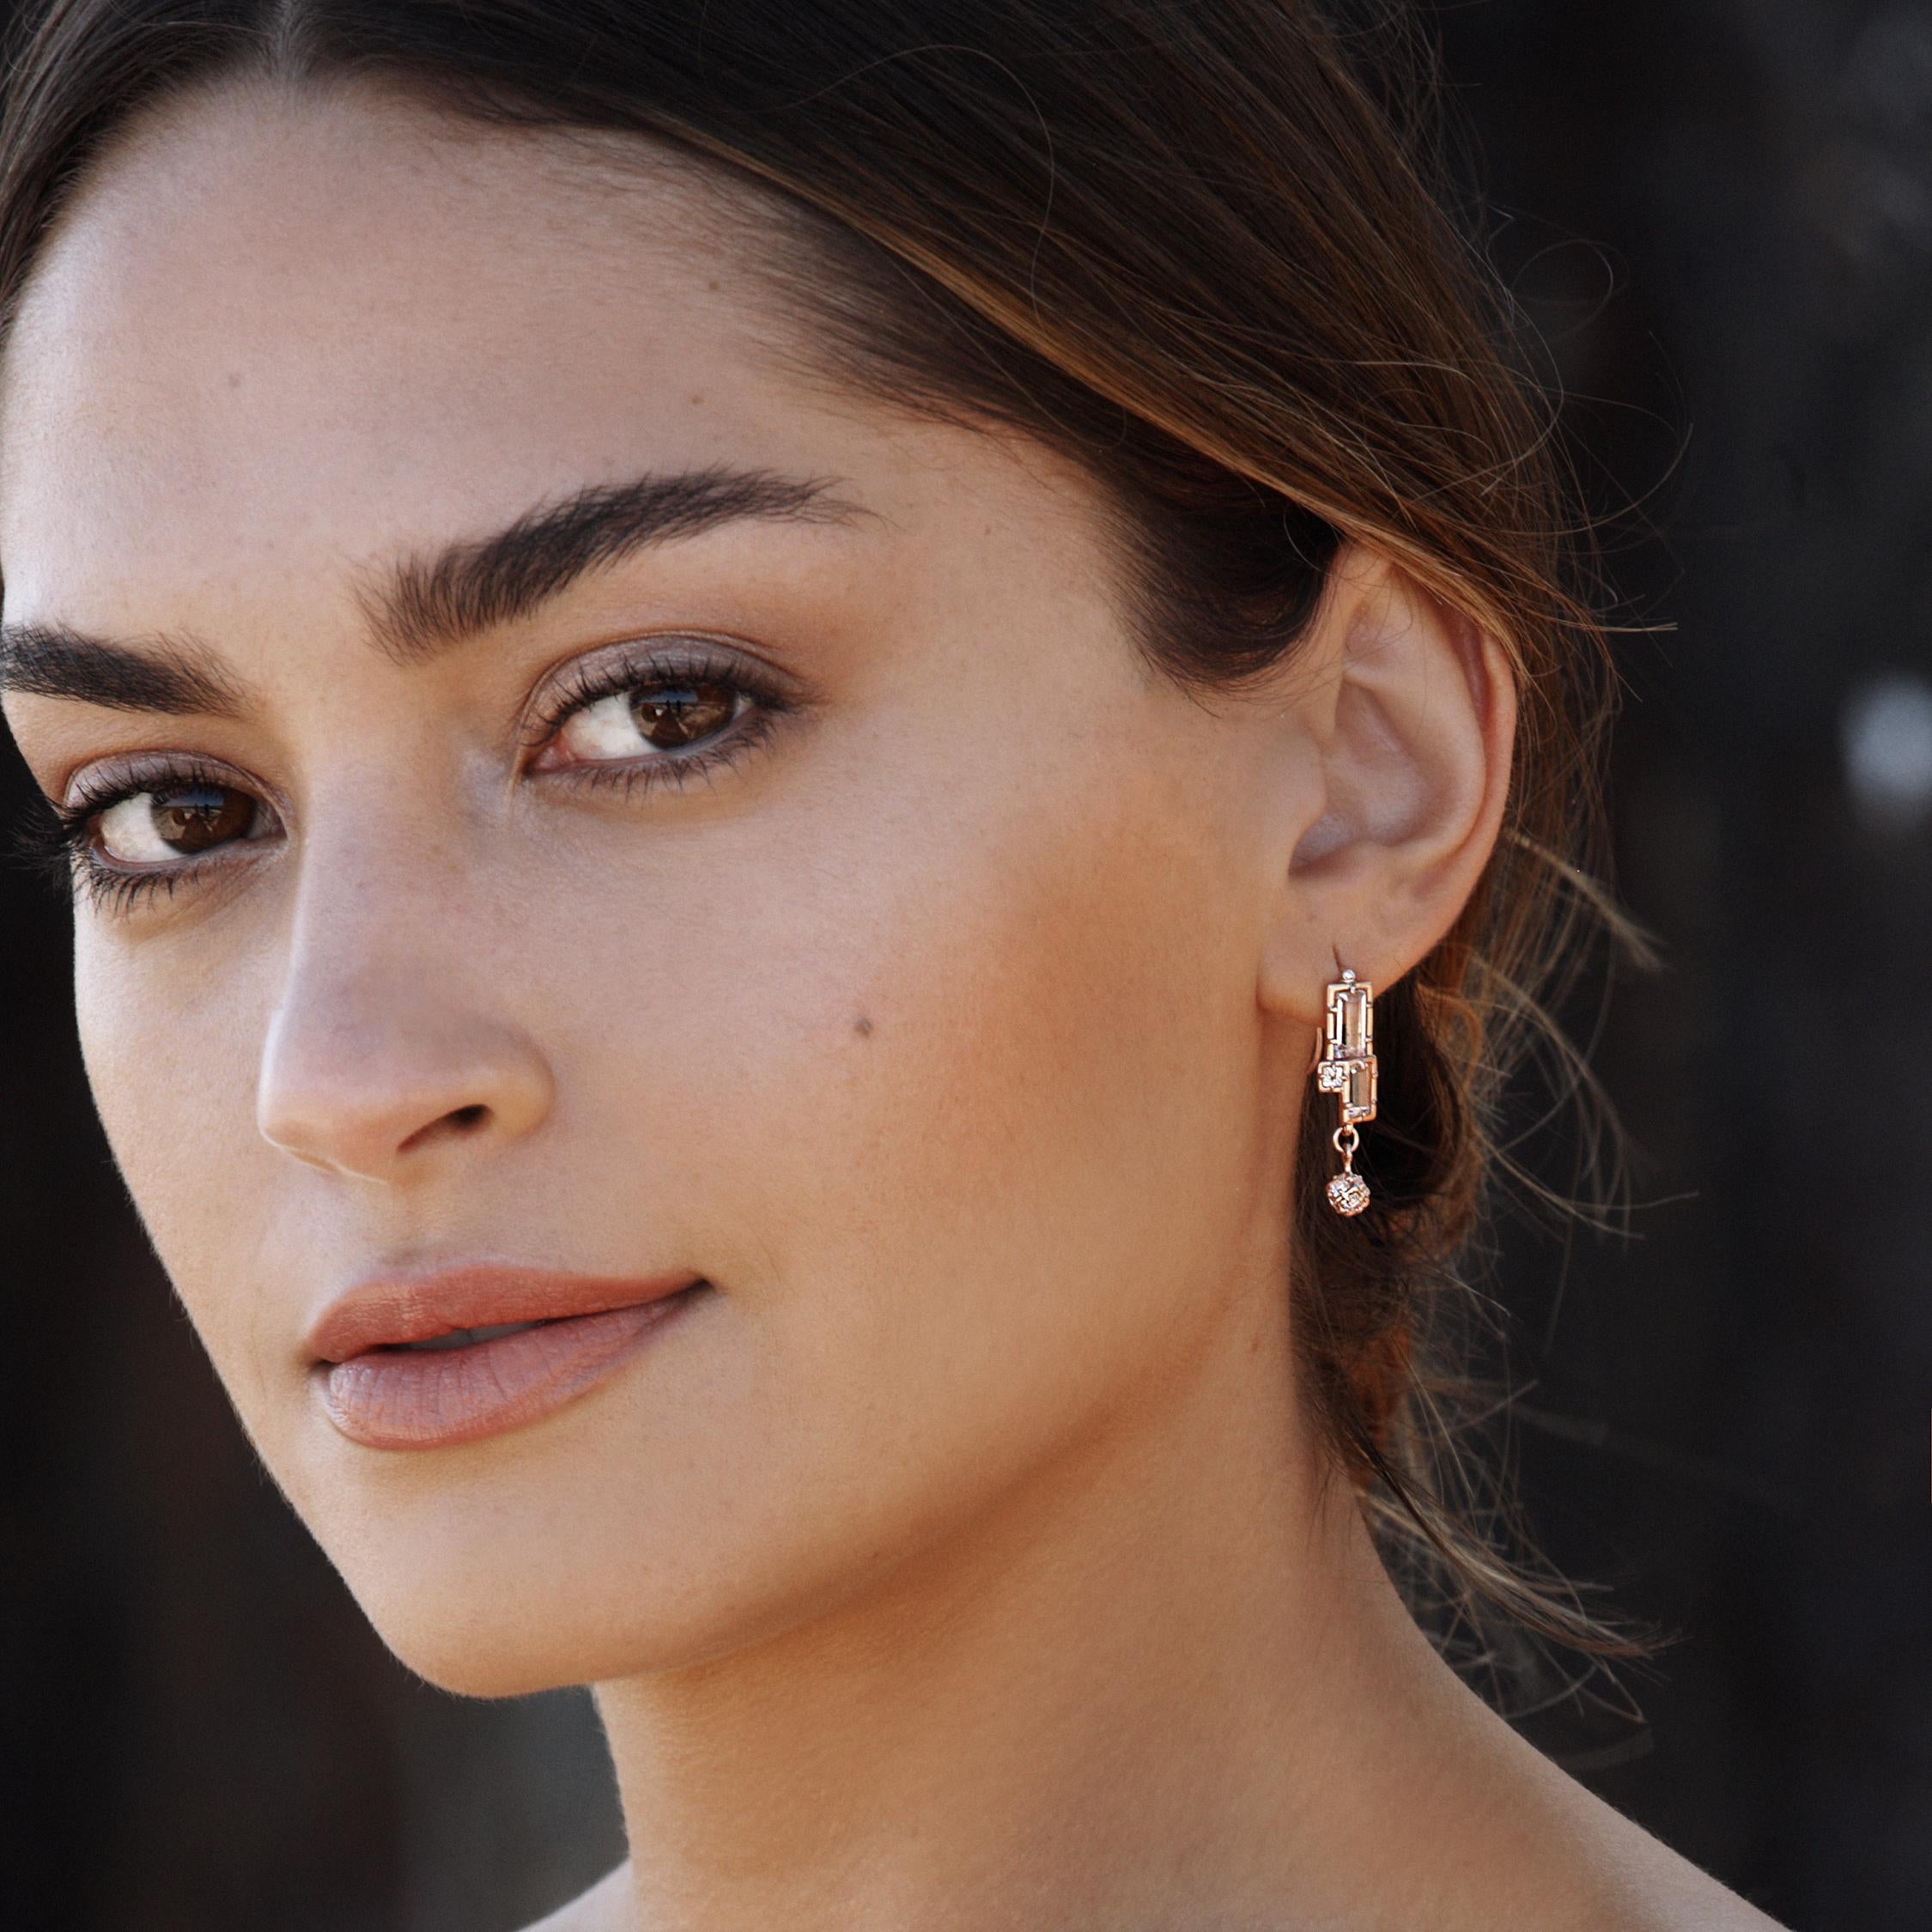 The Deja Vu dangle earring in rose gold is an embodiment of modern elegance. The gems are set at subtle angles to radiate light in all directions; left and right earrings.

14kt rose gold
White topaz- baguette and square cut
Diamond accent
Hook